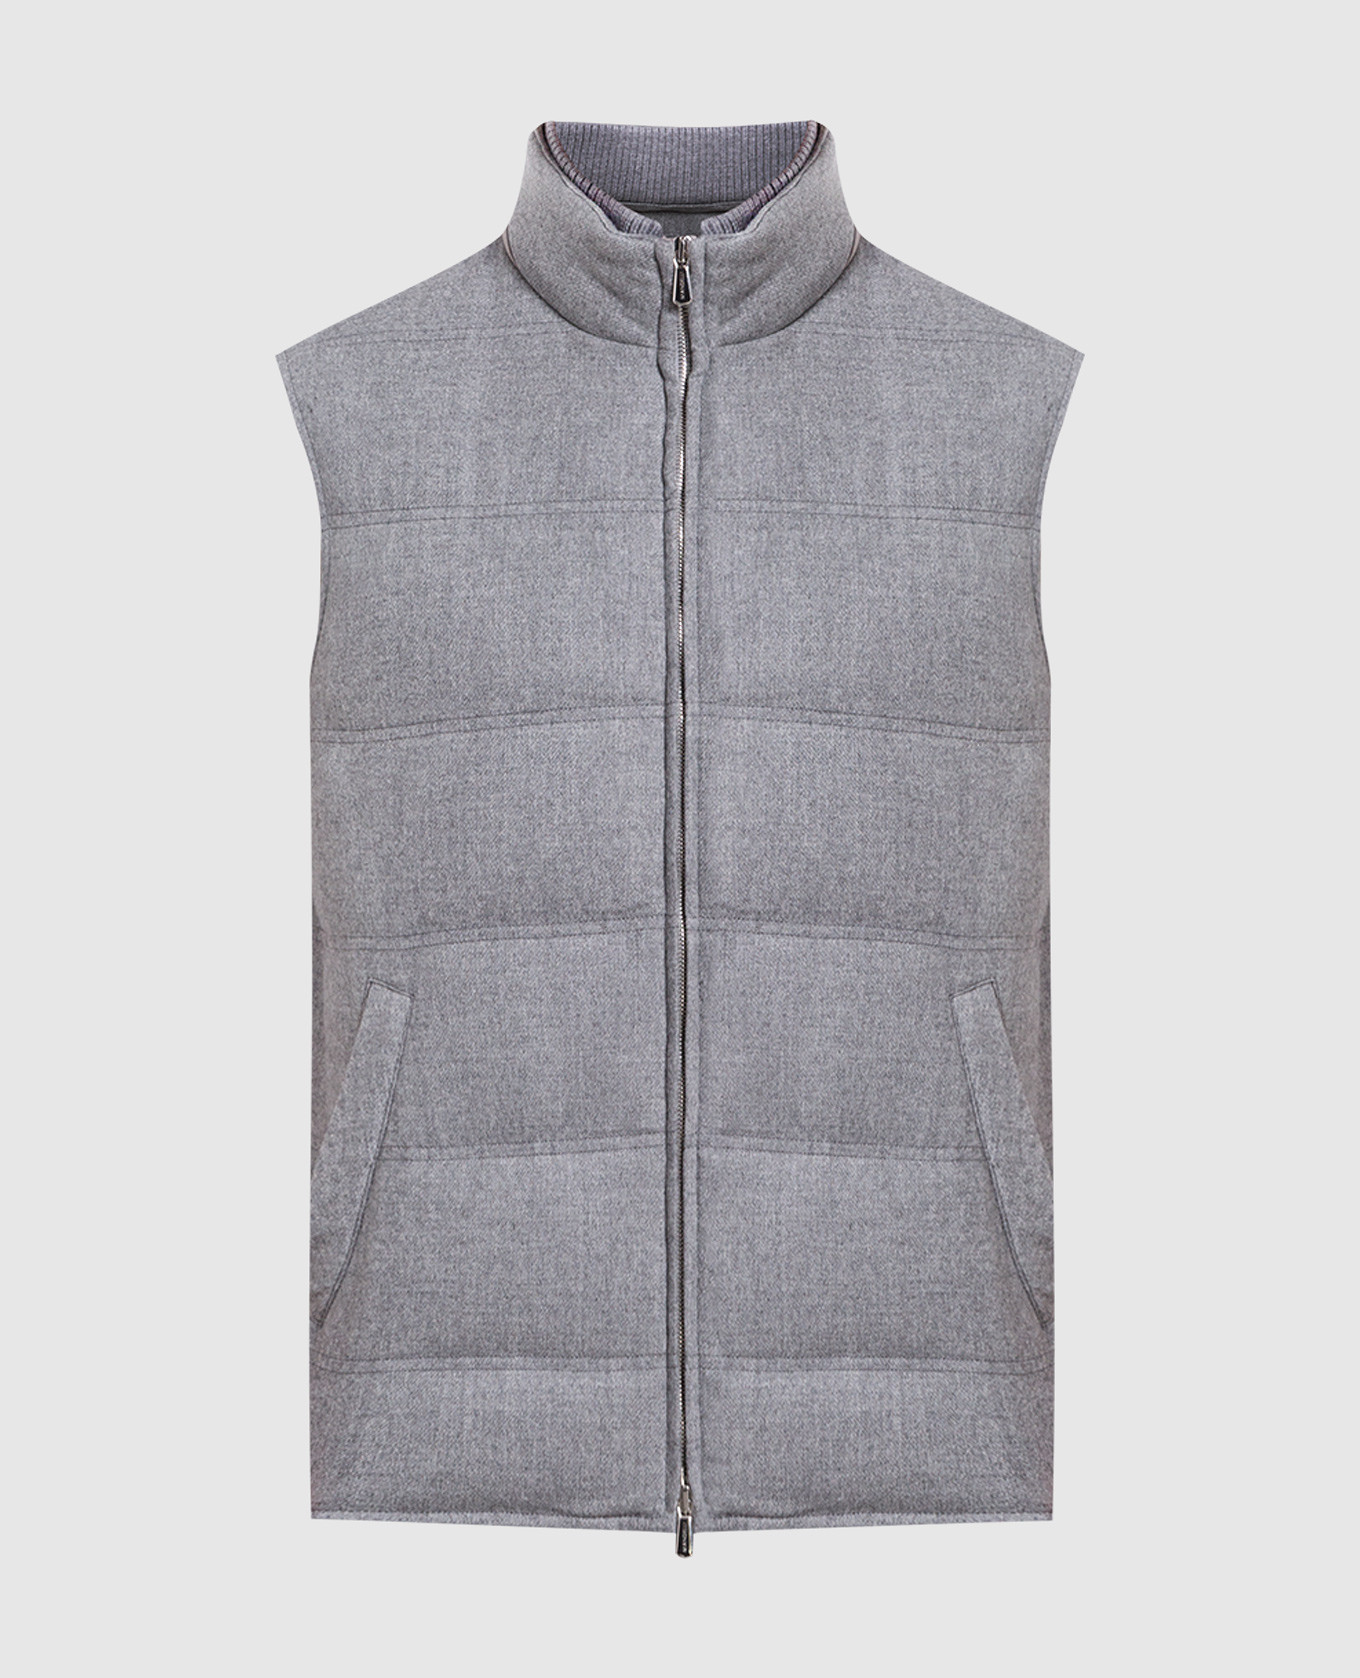 Gray down vest made of wool and cashmere